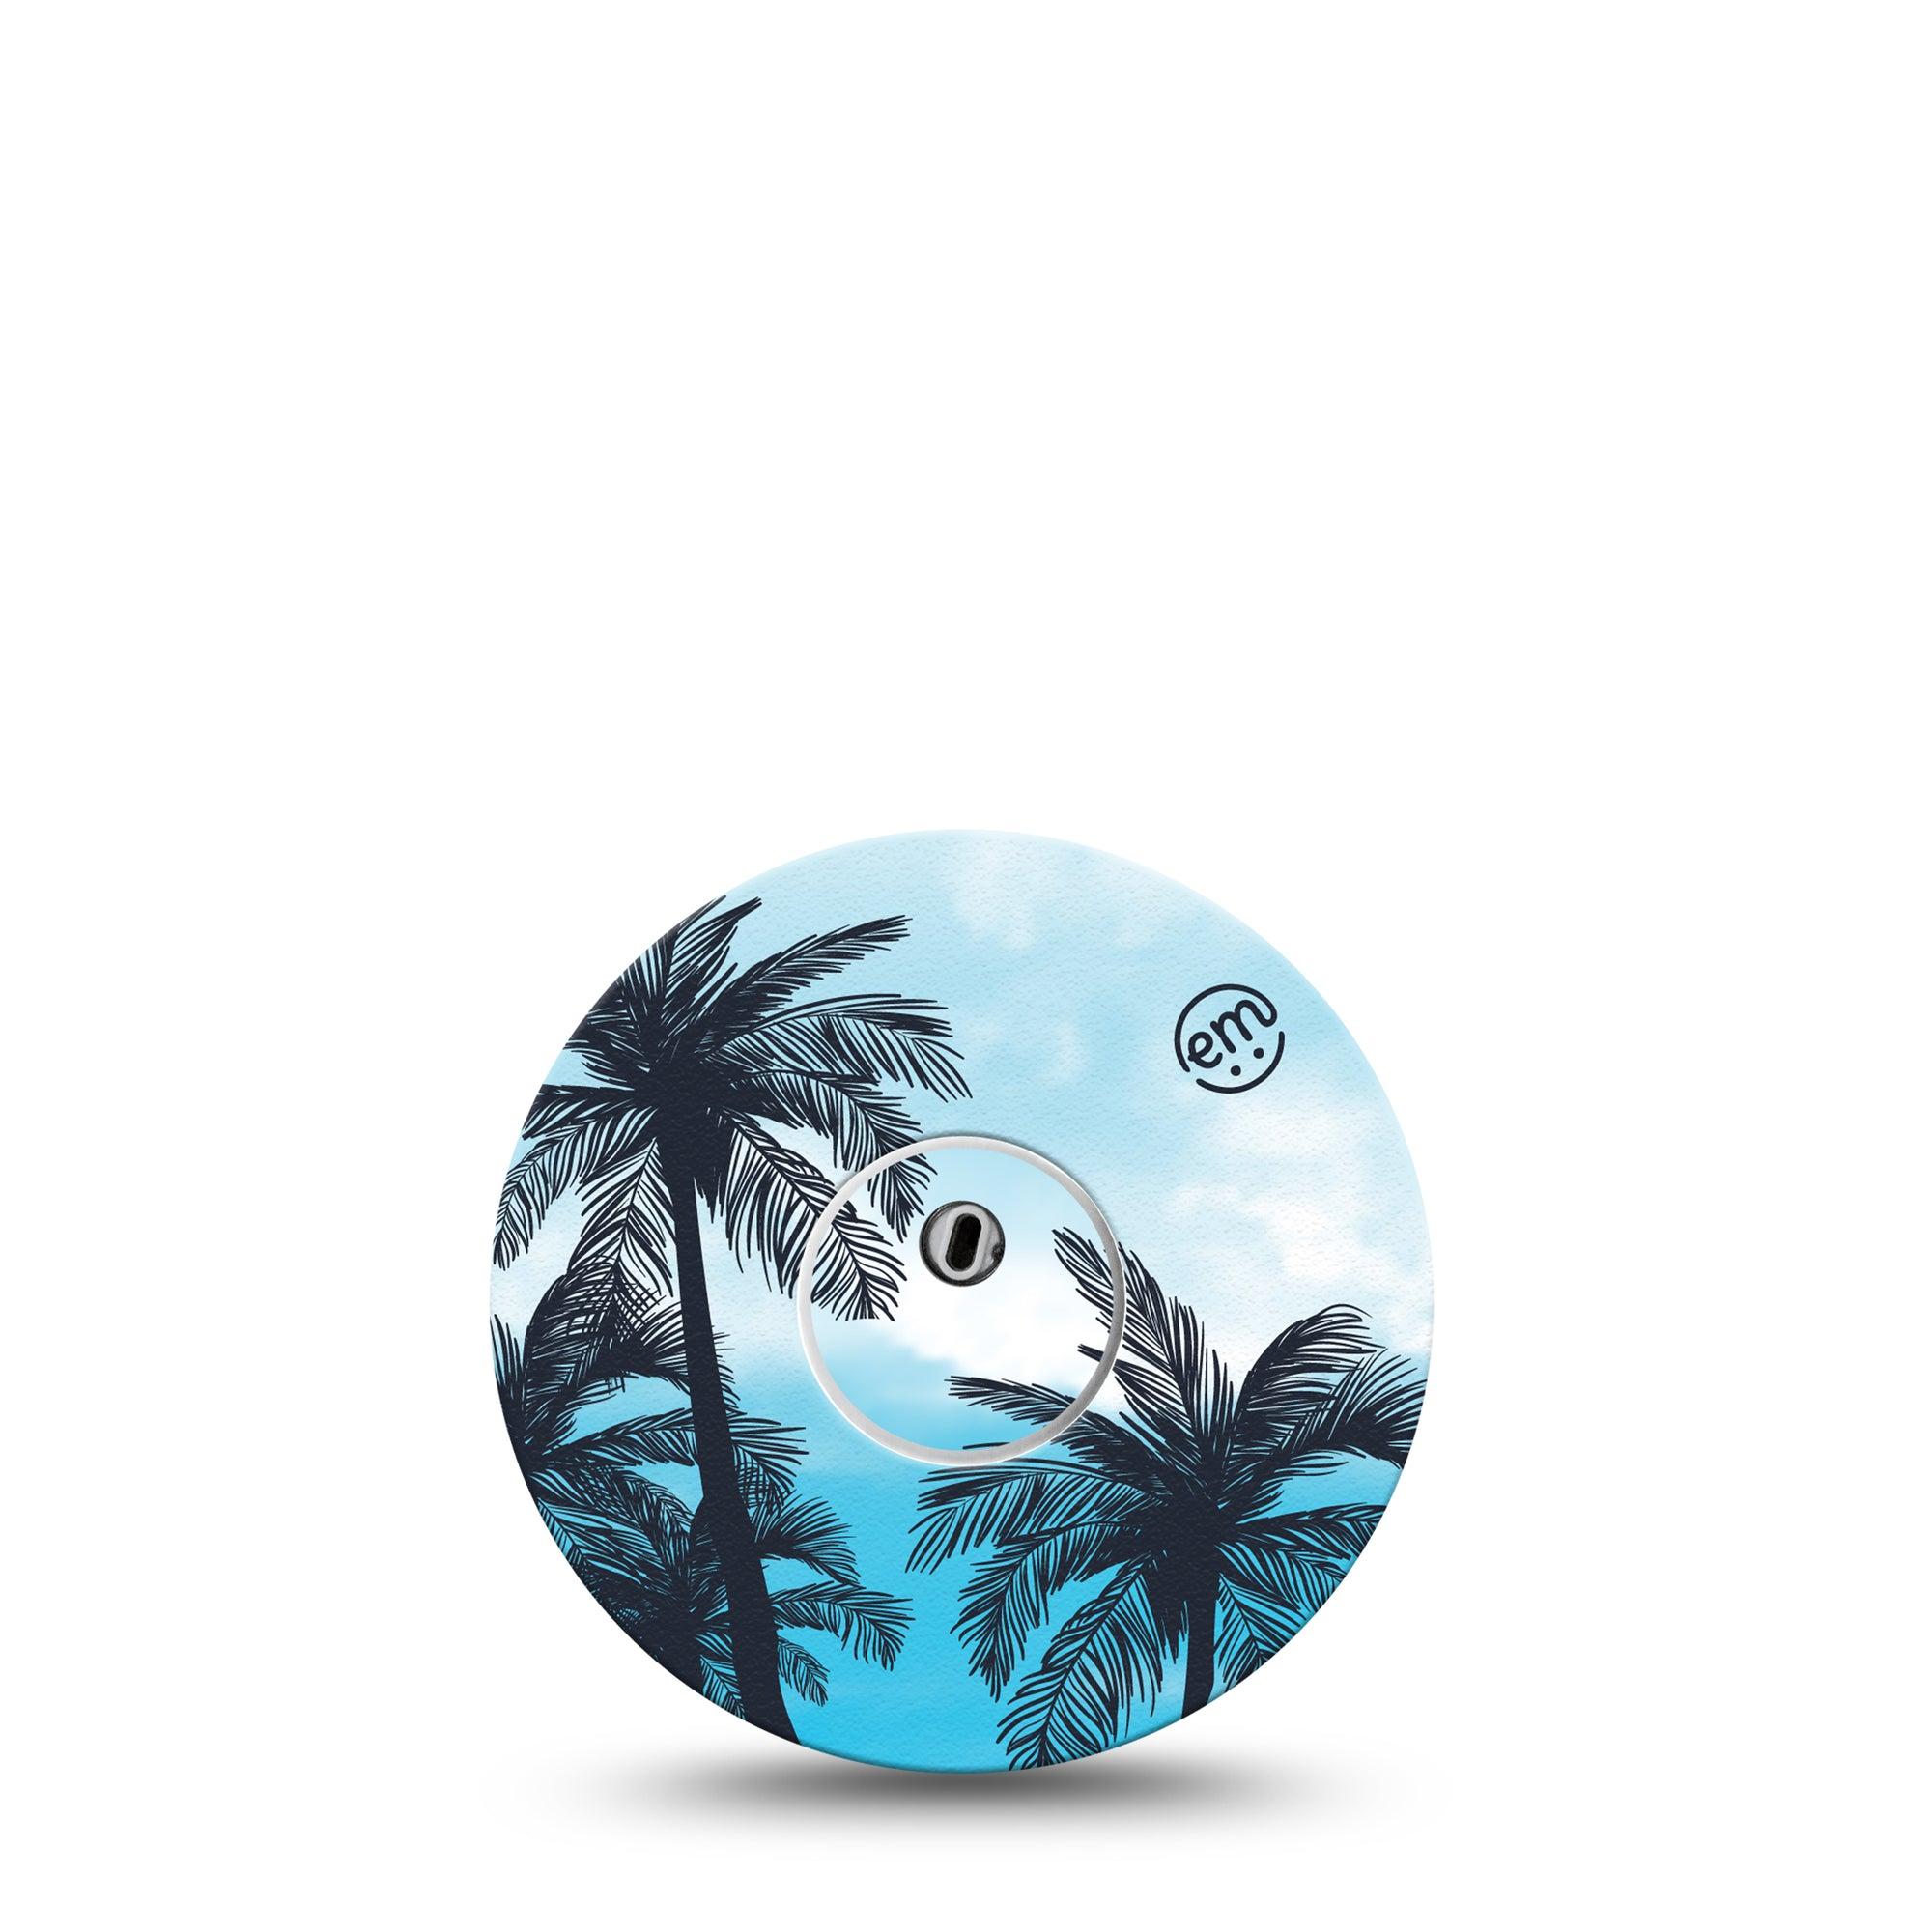 ExpressionMed Libre 3 Transmitter Sticker Beach Vibe, Trees Themed Design, Tape and Sticker